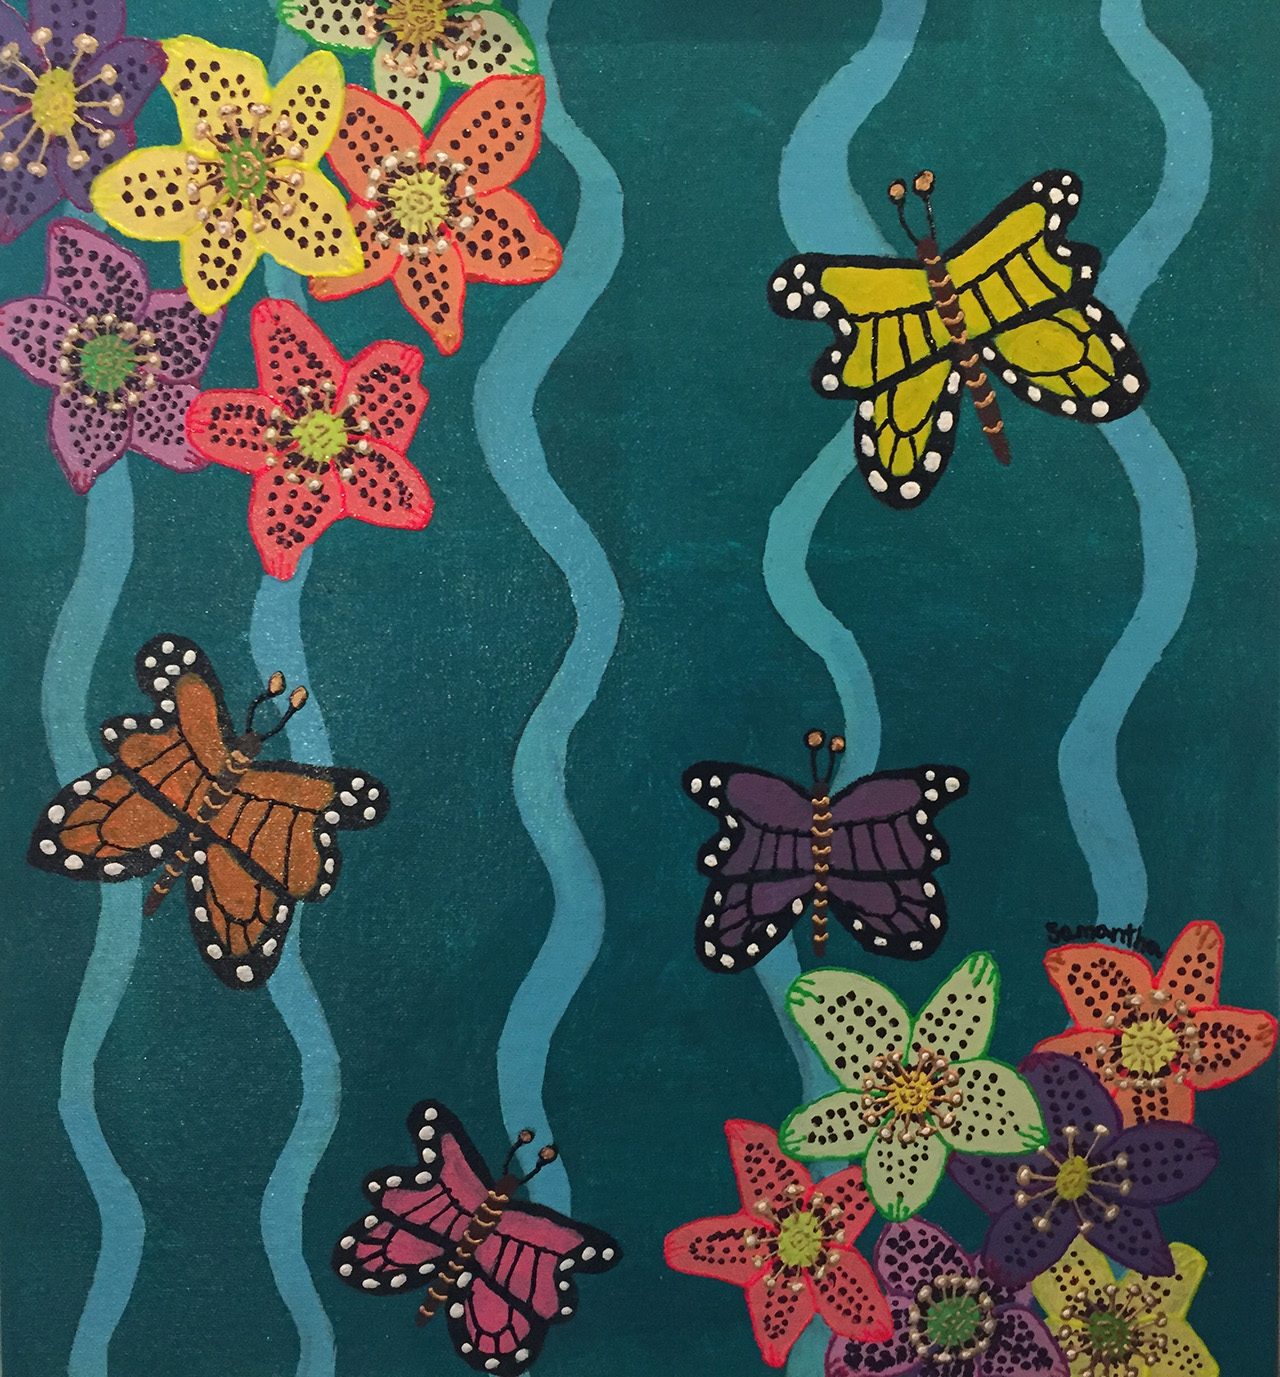 GARDEN. Samantha Kaspar's Butterfly and Flowers showcases a different approach of the world around her. More than just simple scenes, flowers and butterflies symbolizes her free and happy life   